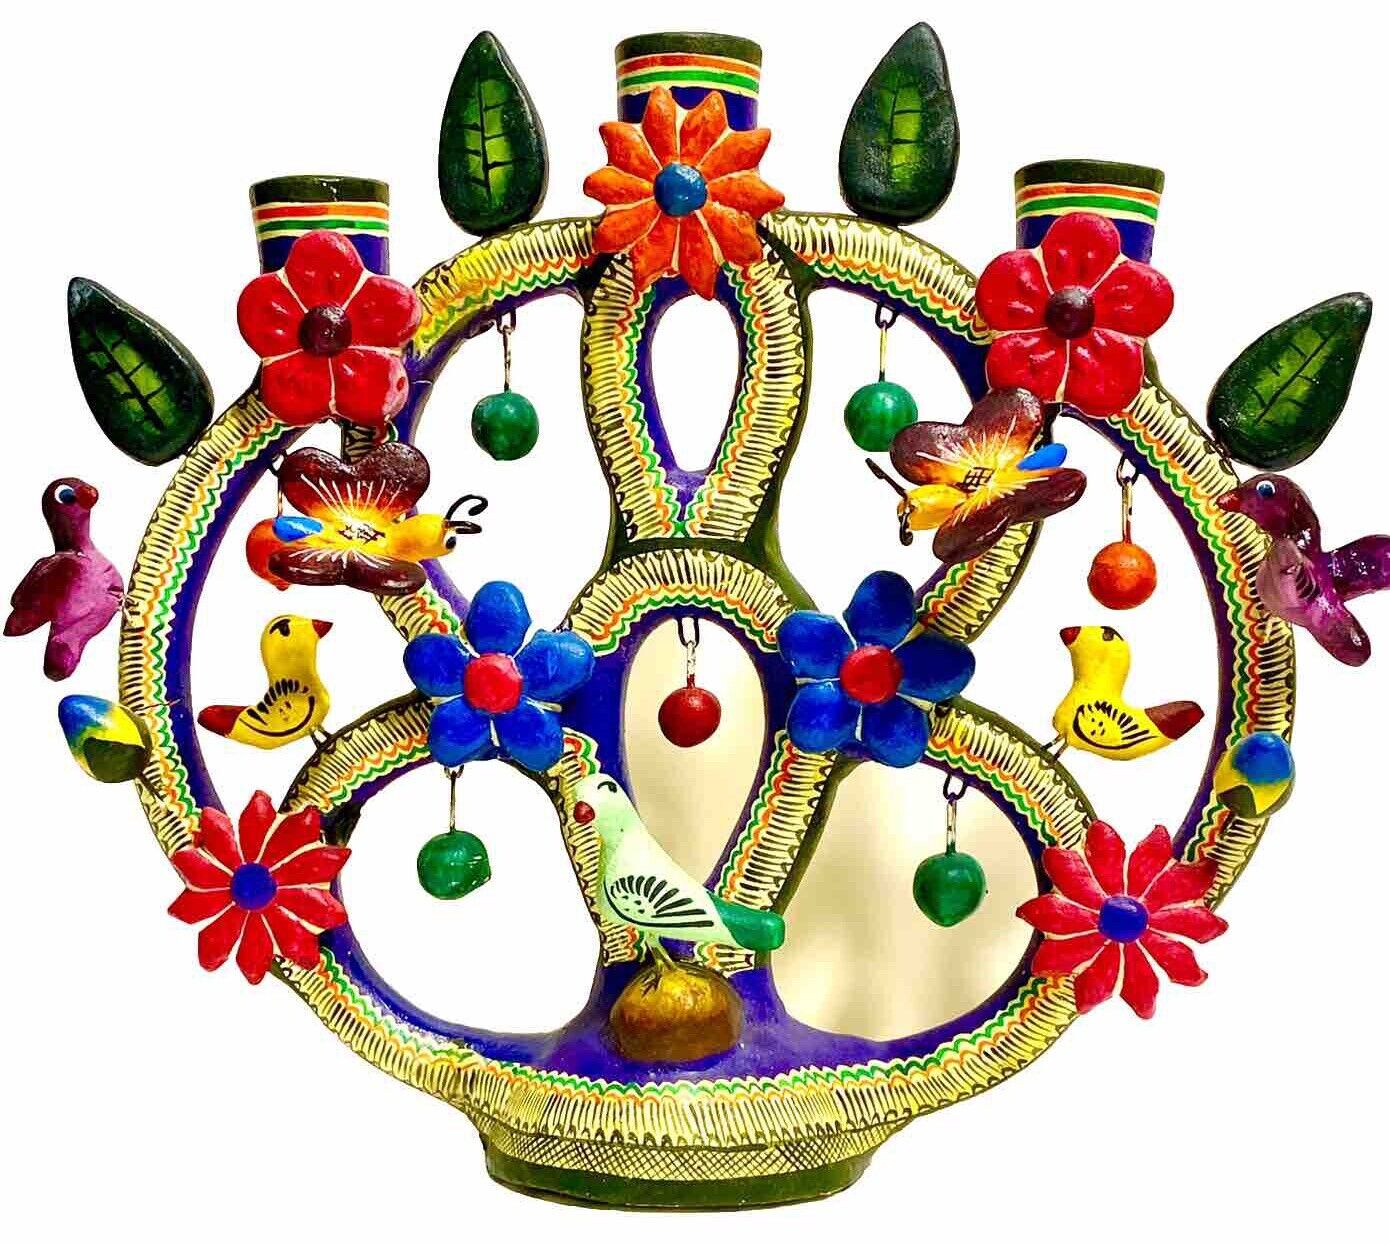 Vibrant Mexican Tree Of Life Folk Art Candelabra All Handcrafted Spring Vintage